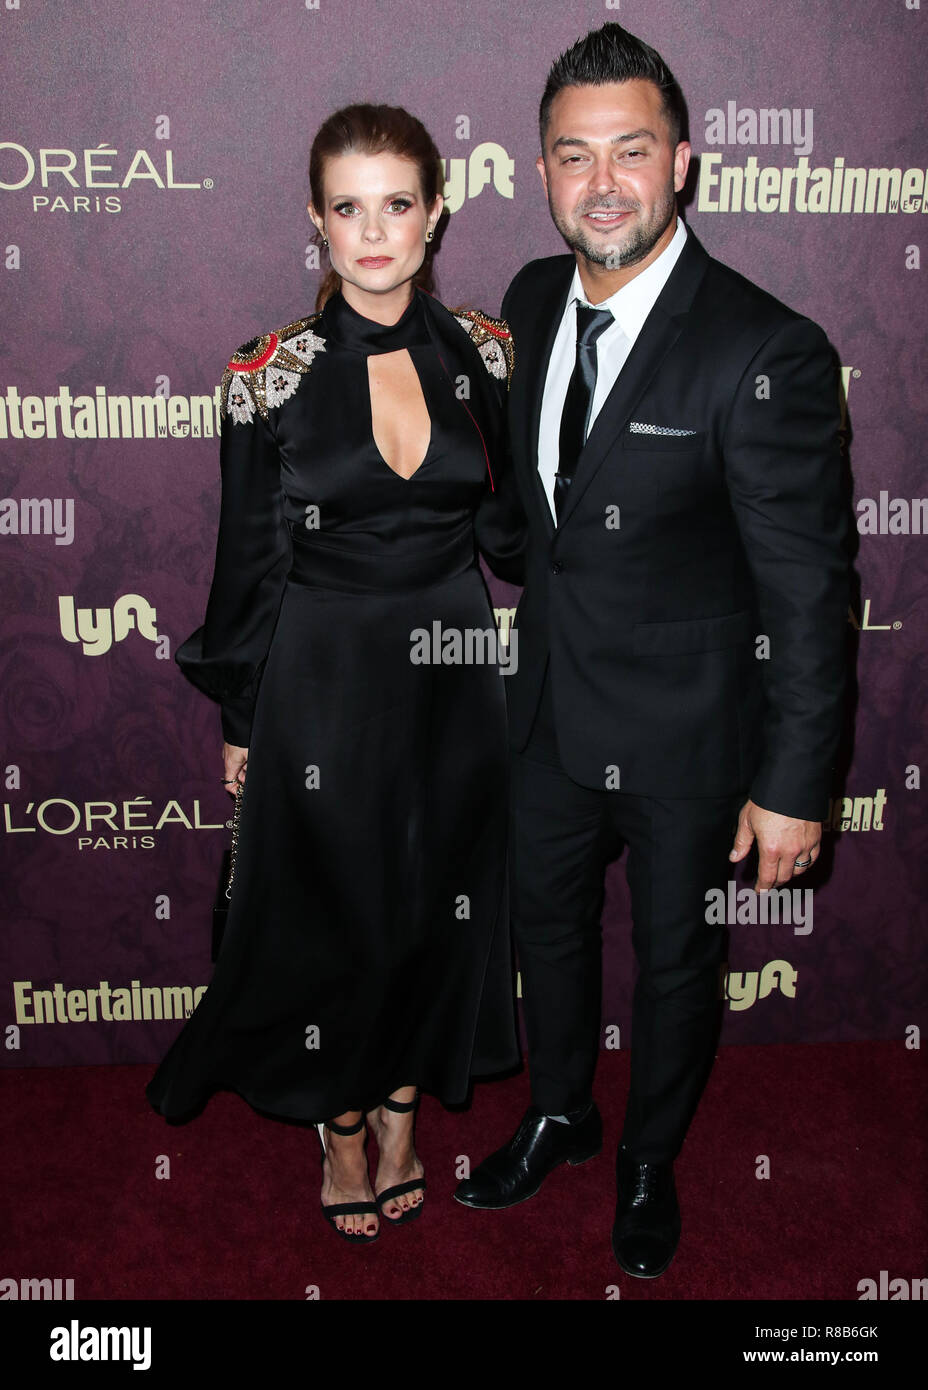 WEST HOLLYWOOD, LOS ANGELES, CA, USA - SEPTEMBER 15: JoAnna Garcia Swisher, Nick Swisher at the 2018 Entertainment Weekly Pre-Emmy Party held at the Sunset Tower Hotel on September 15, 2018 in West Hollywood, Los Angeles, California, United States. (Photo by Xavier Collin/Image Press Agency) Stock Photo